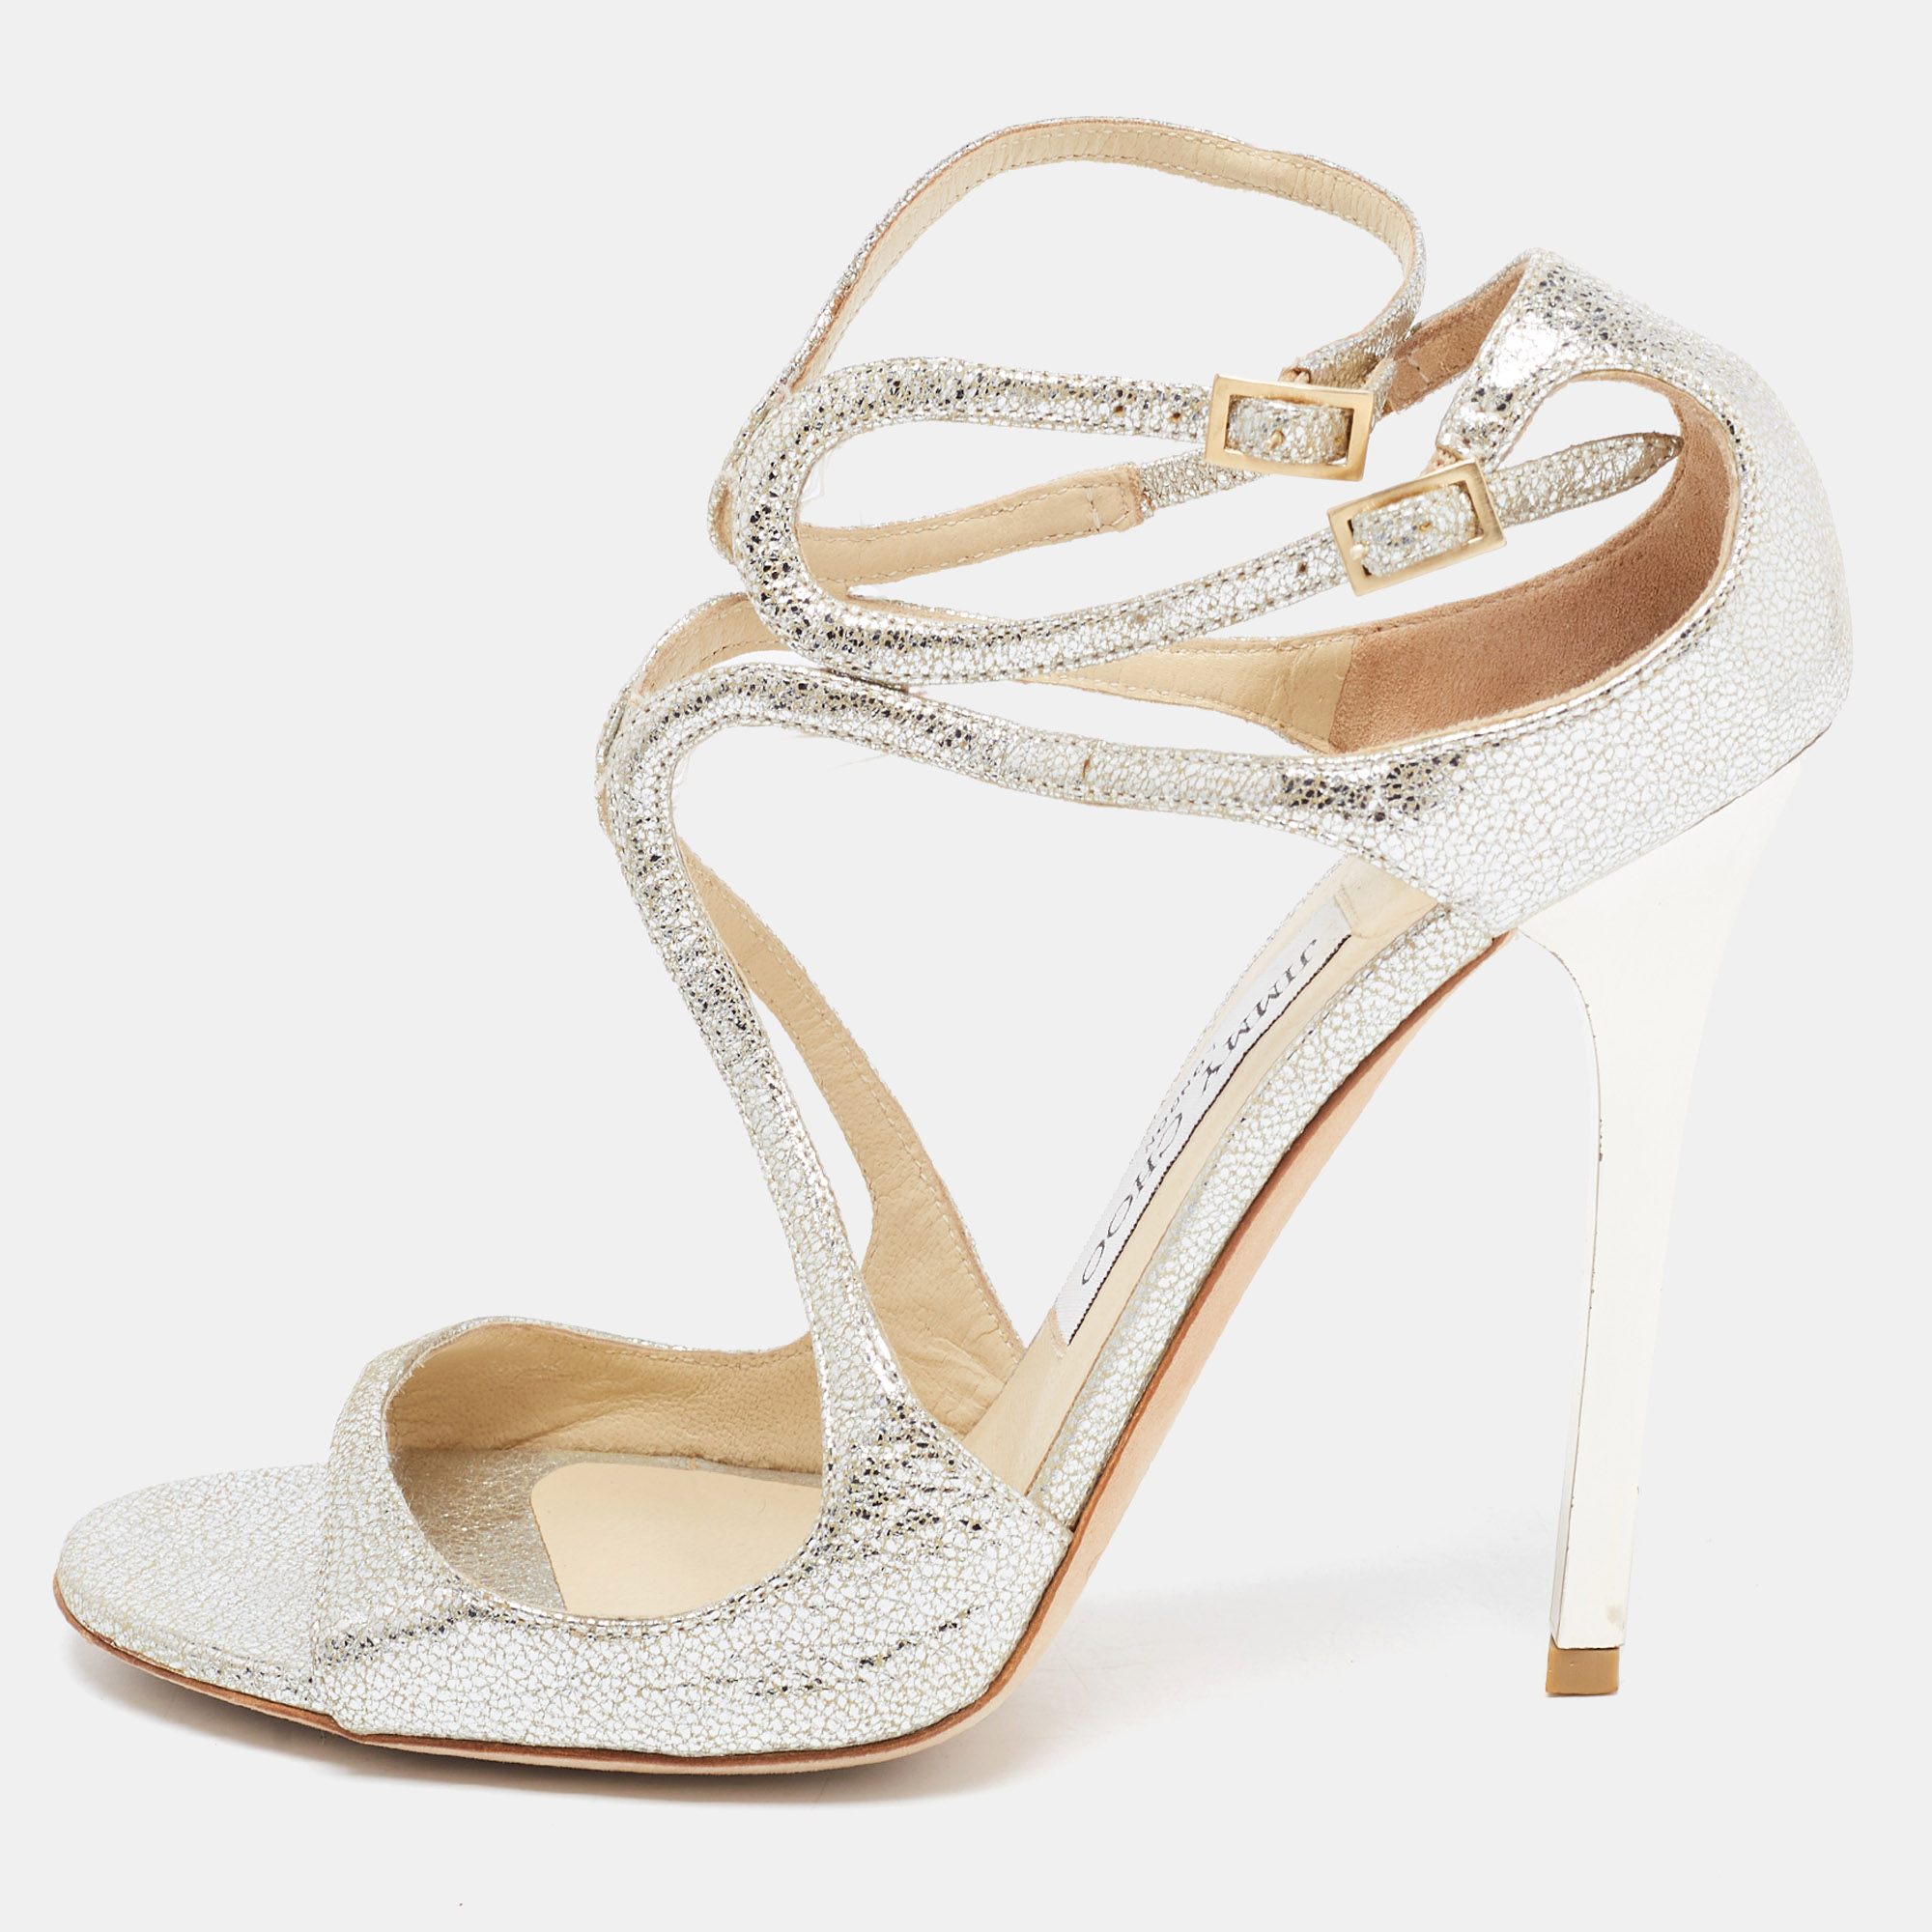 Jimmy Choo Silver Foil Leather Lang Strappy Sandals Size 37.5